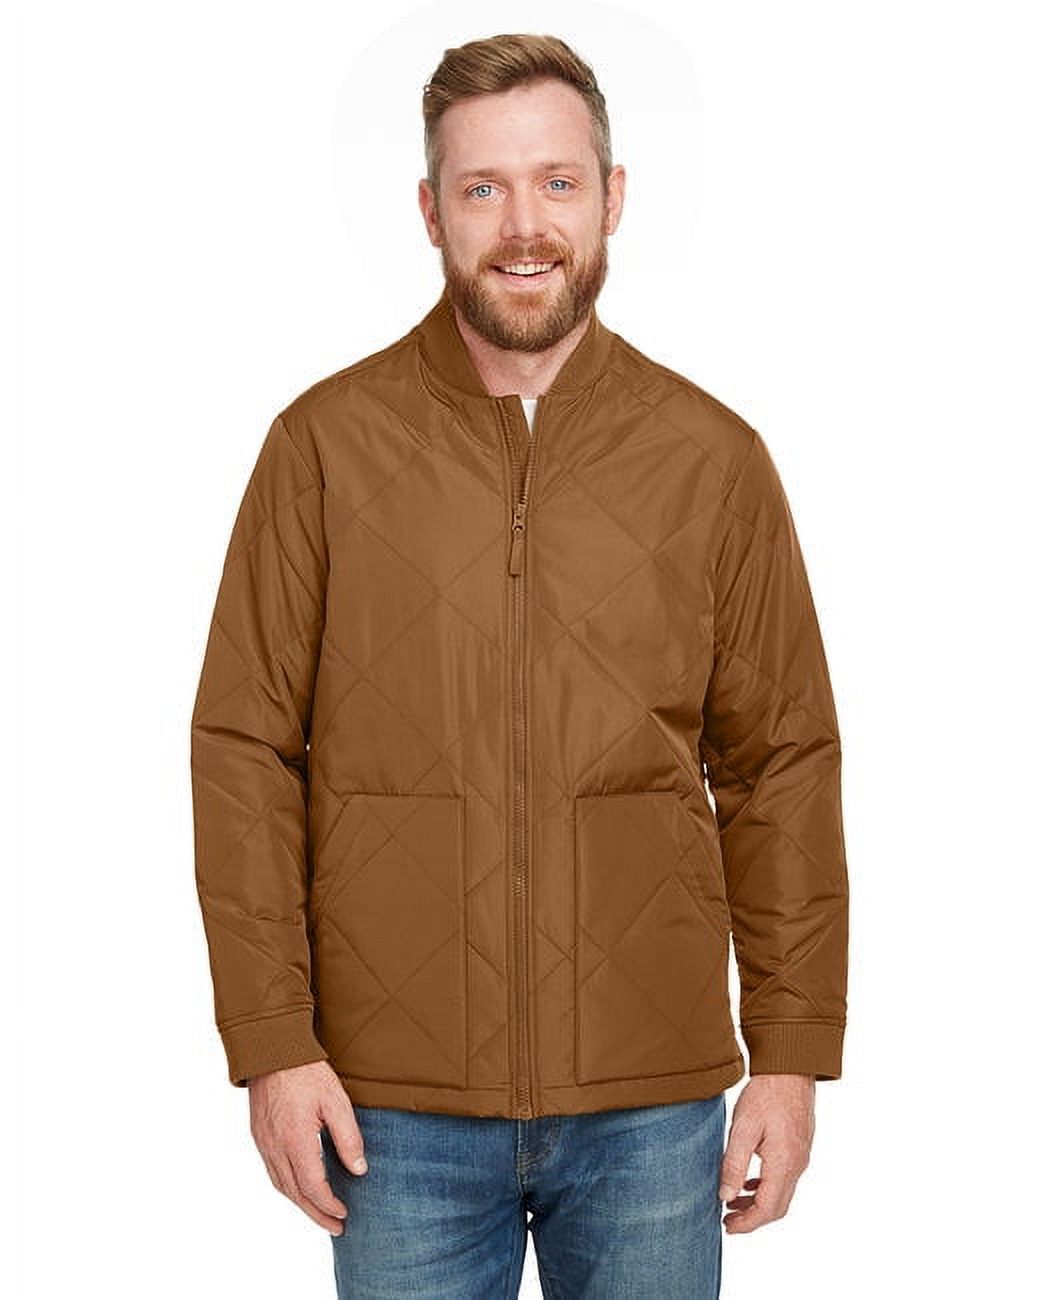 Adult Dockside Insulated Utility Jacket - DUCK BROWN - L - image 1 of 3